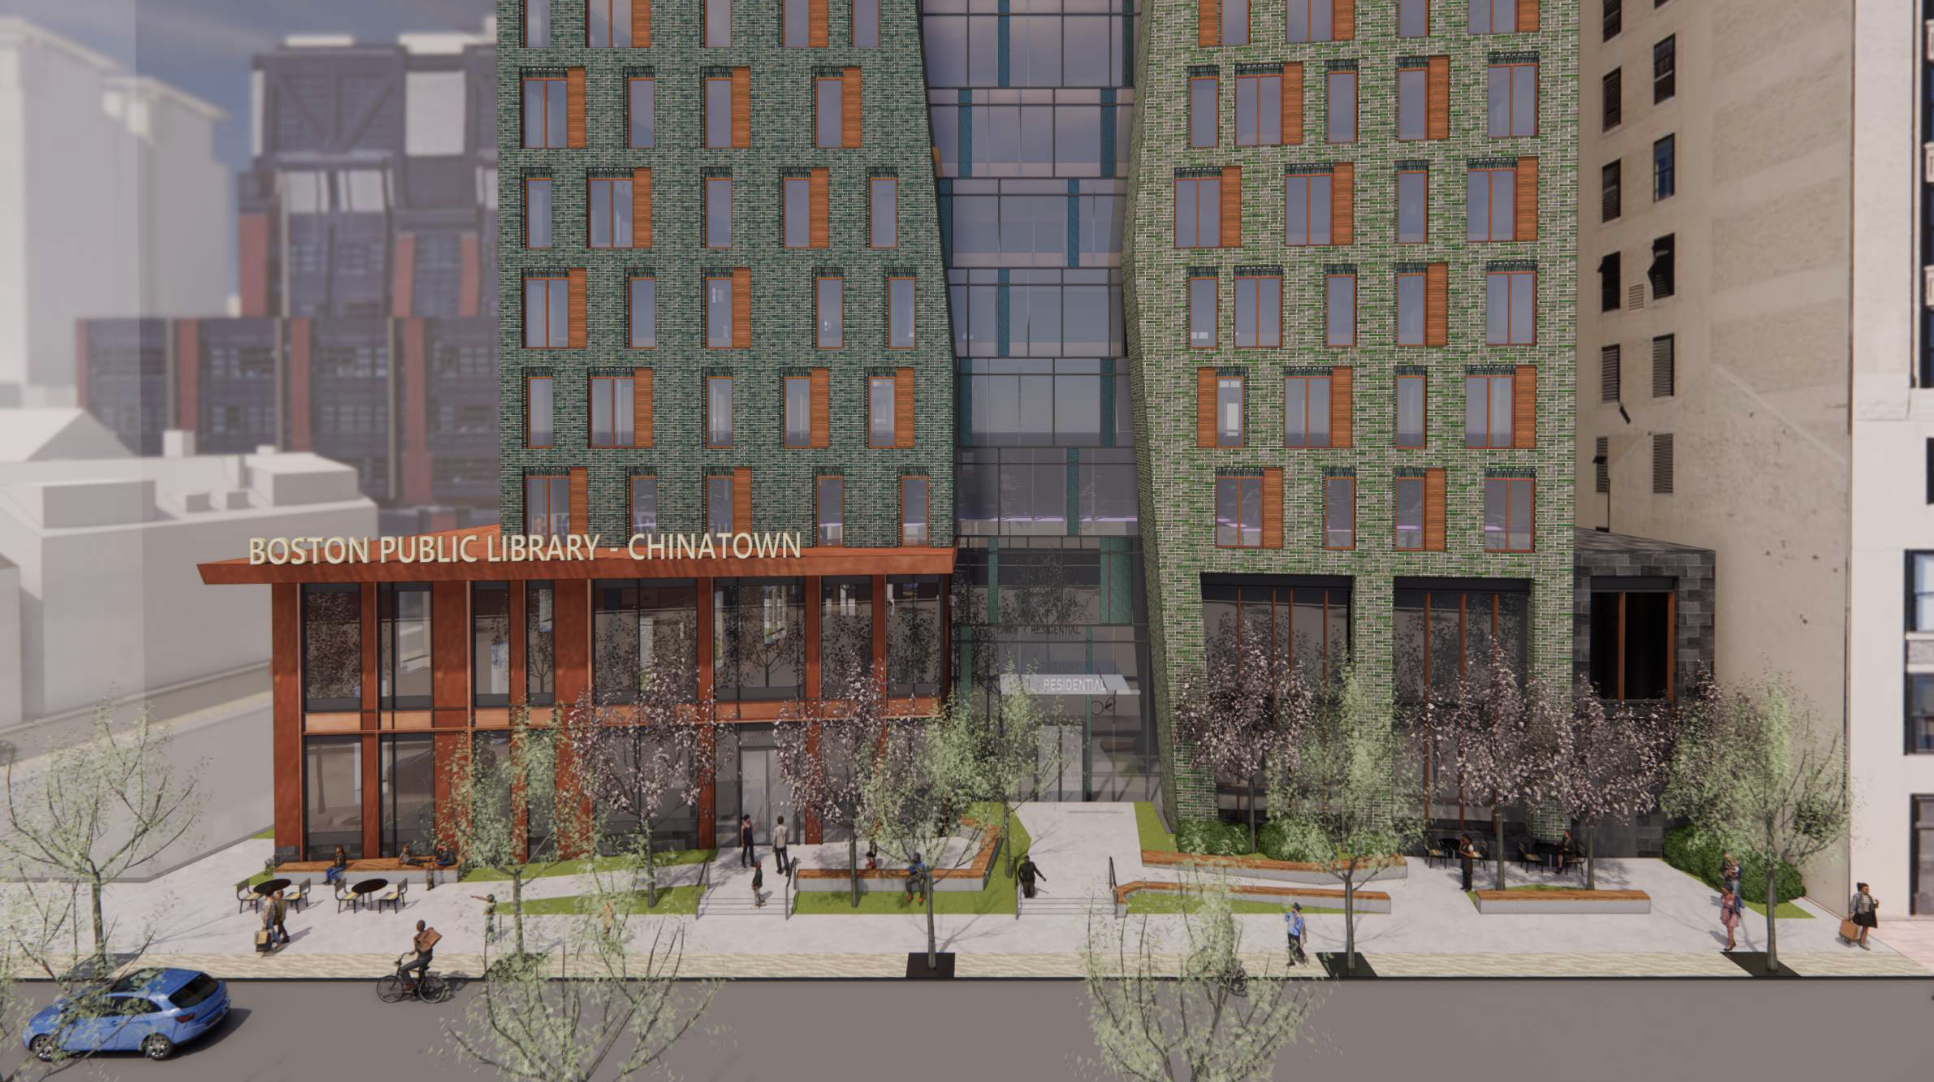 An architect's rendering of a new building with a ground-floor space signed "Boston Public Library" and 11 floors of apartments above. The upper floors are clad in green bricks and a small elevated plaza with ramps and small trees leads to the building's main entrance.